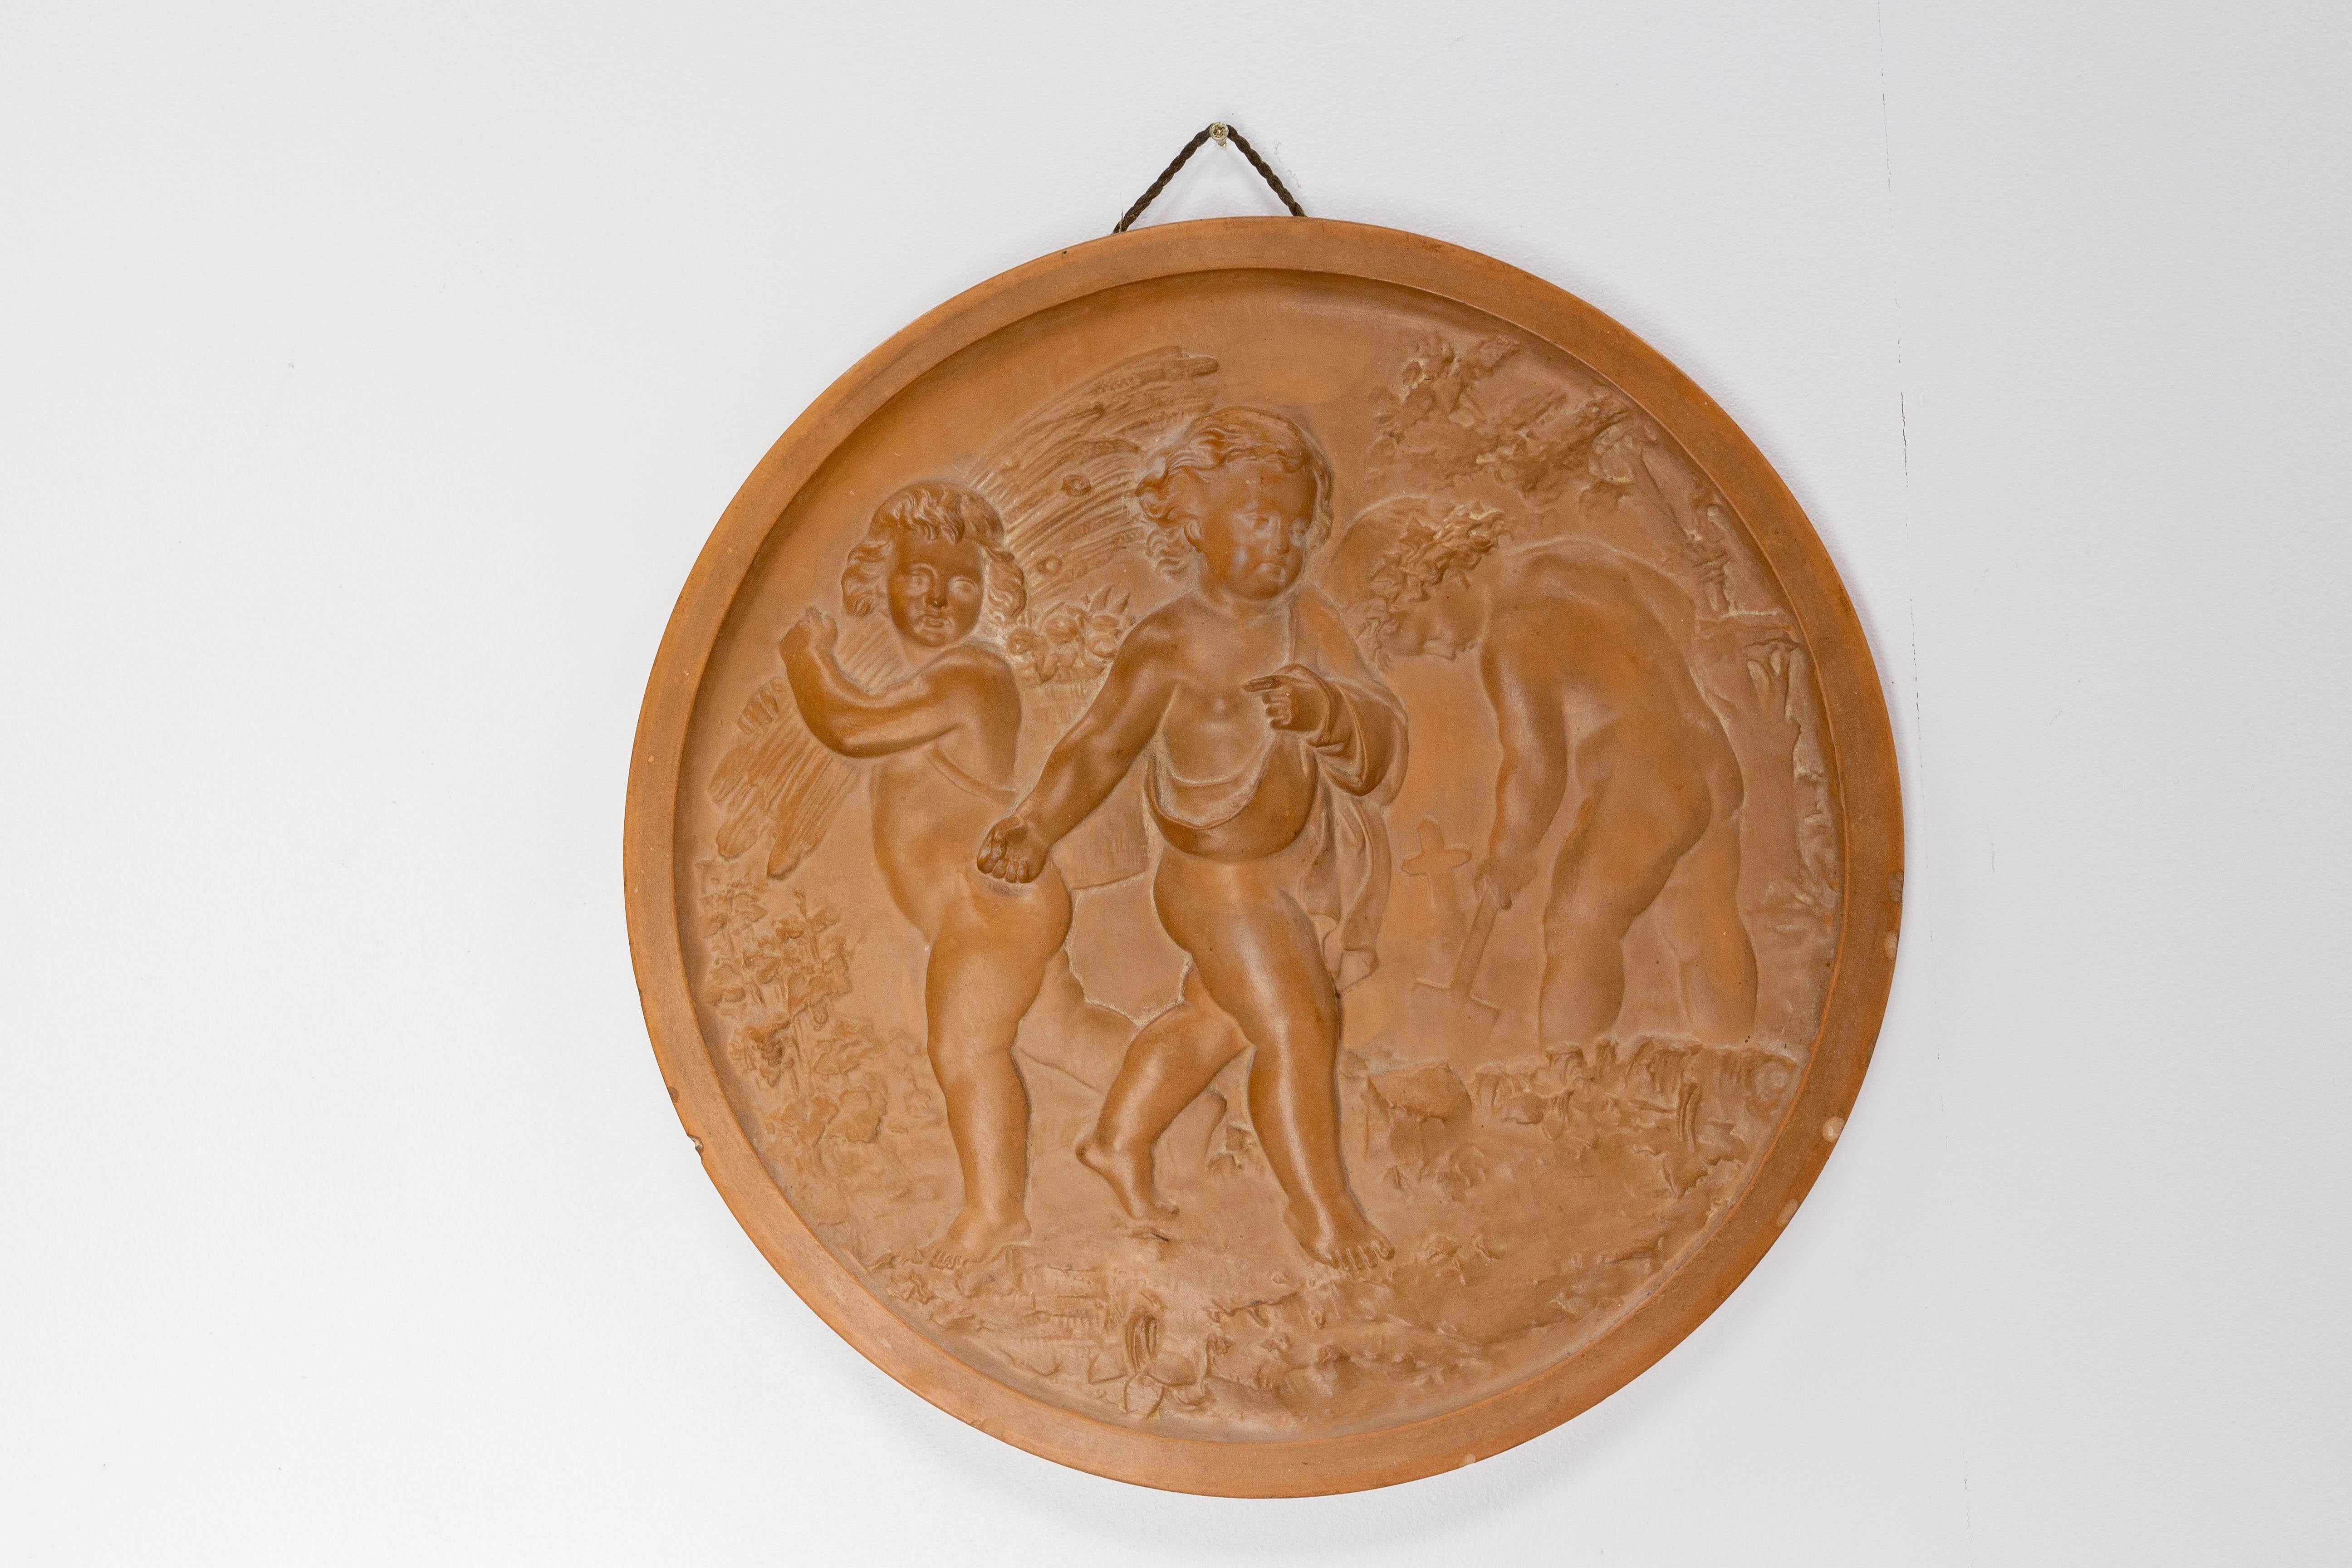 Terracotta medallion representing three putti  in agricultural scenes: turning the land, sowing and harvesting
Wall plaque
Good condition with good patina due to age.
If you want to make a pair for your decoration, we have a second medallion